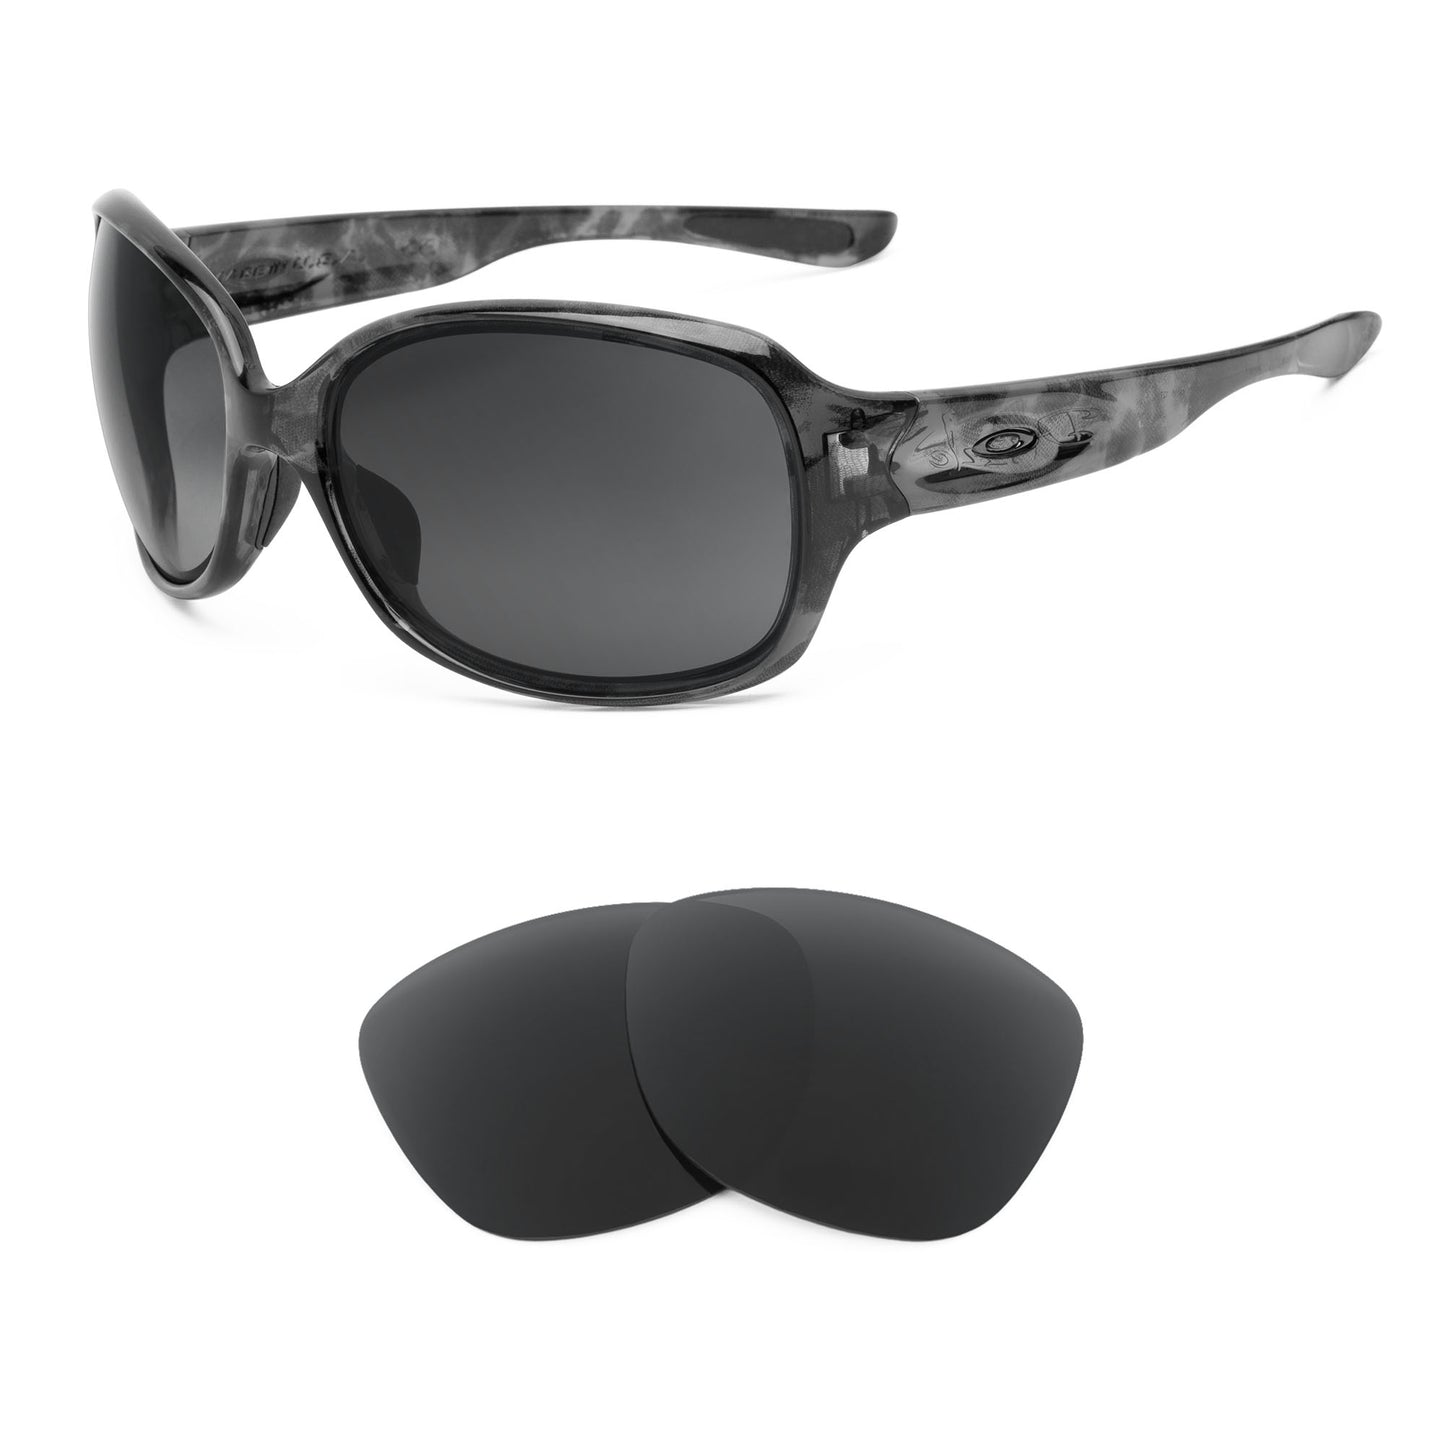 Oakley Drizzle sunglasses with replacement lenses